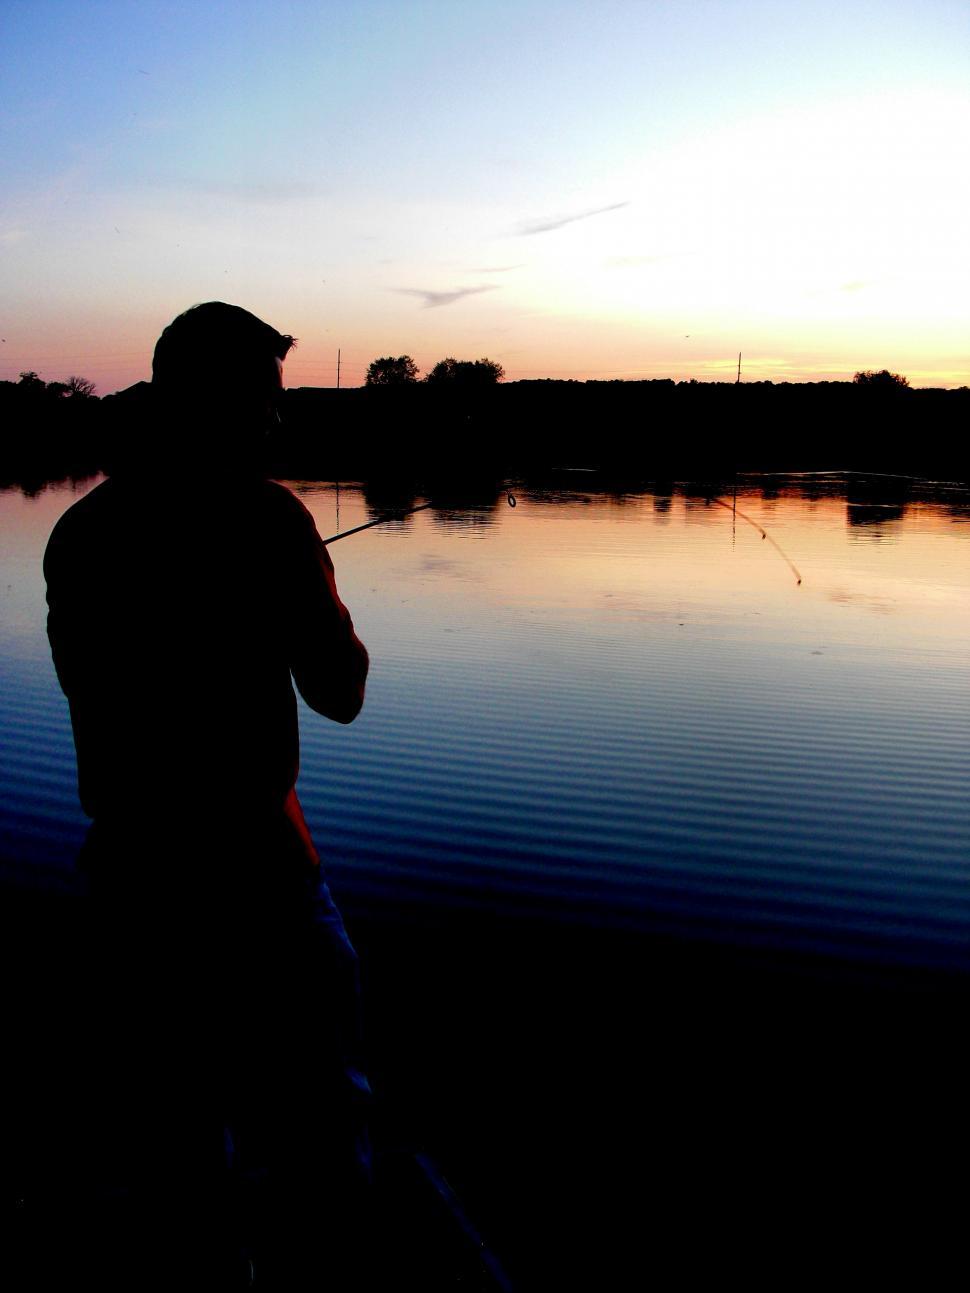 Free Image of Man Standing Next to Body of Water 